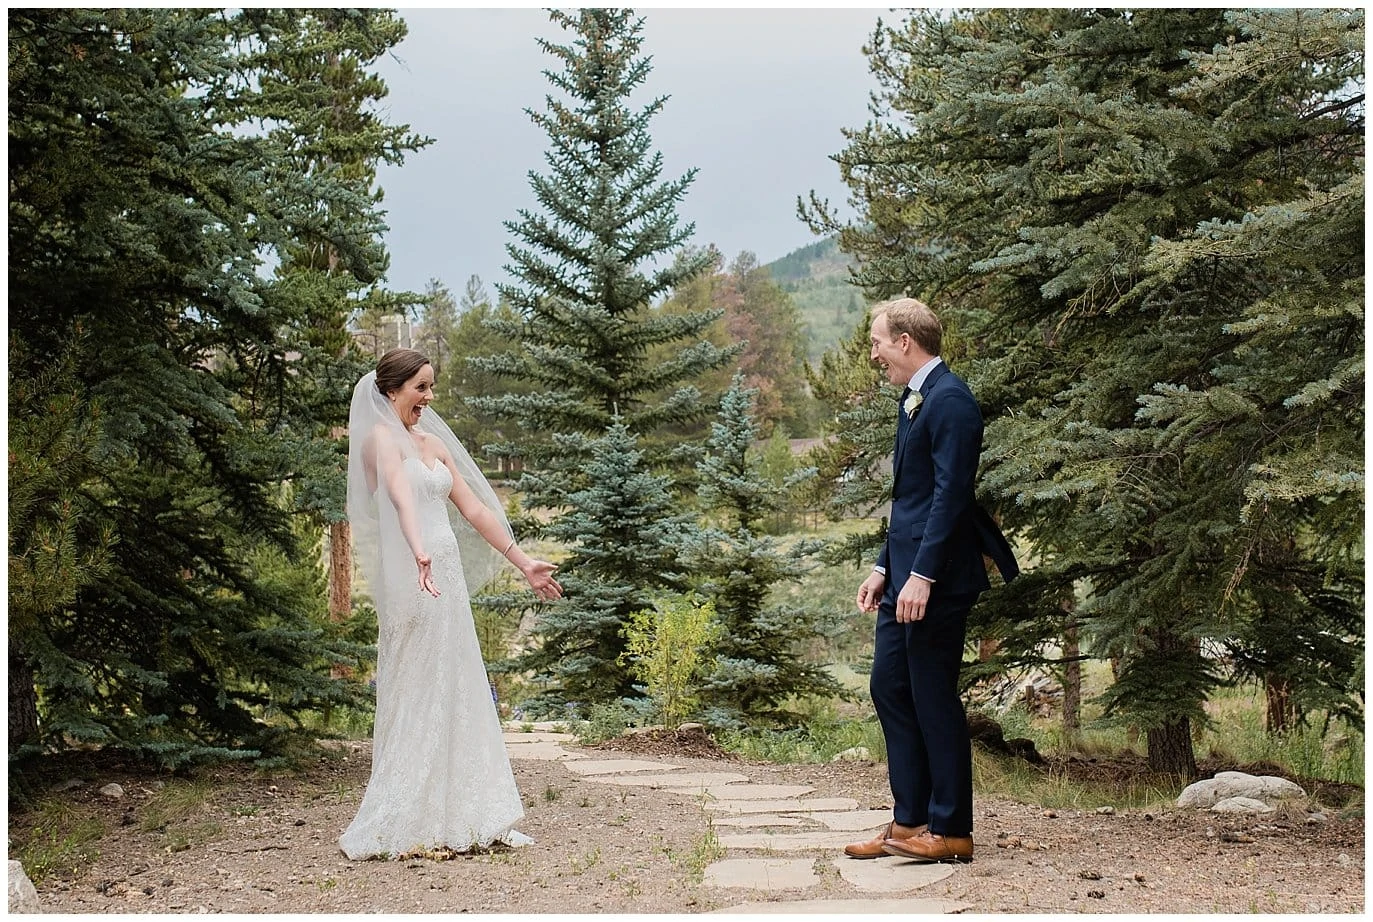 excited first look between bride and groom at Arapahoe Basin Black Mountain Lodge Wedding by Breckenridge Wedding Photographer Jennie Crate